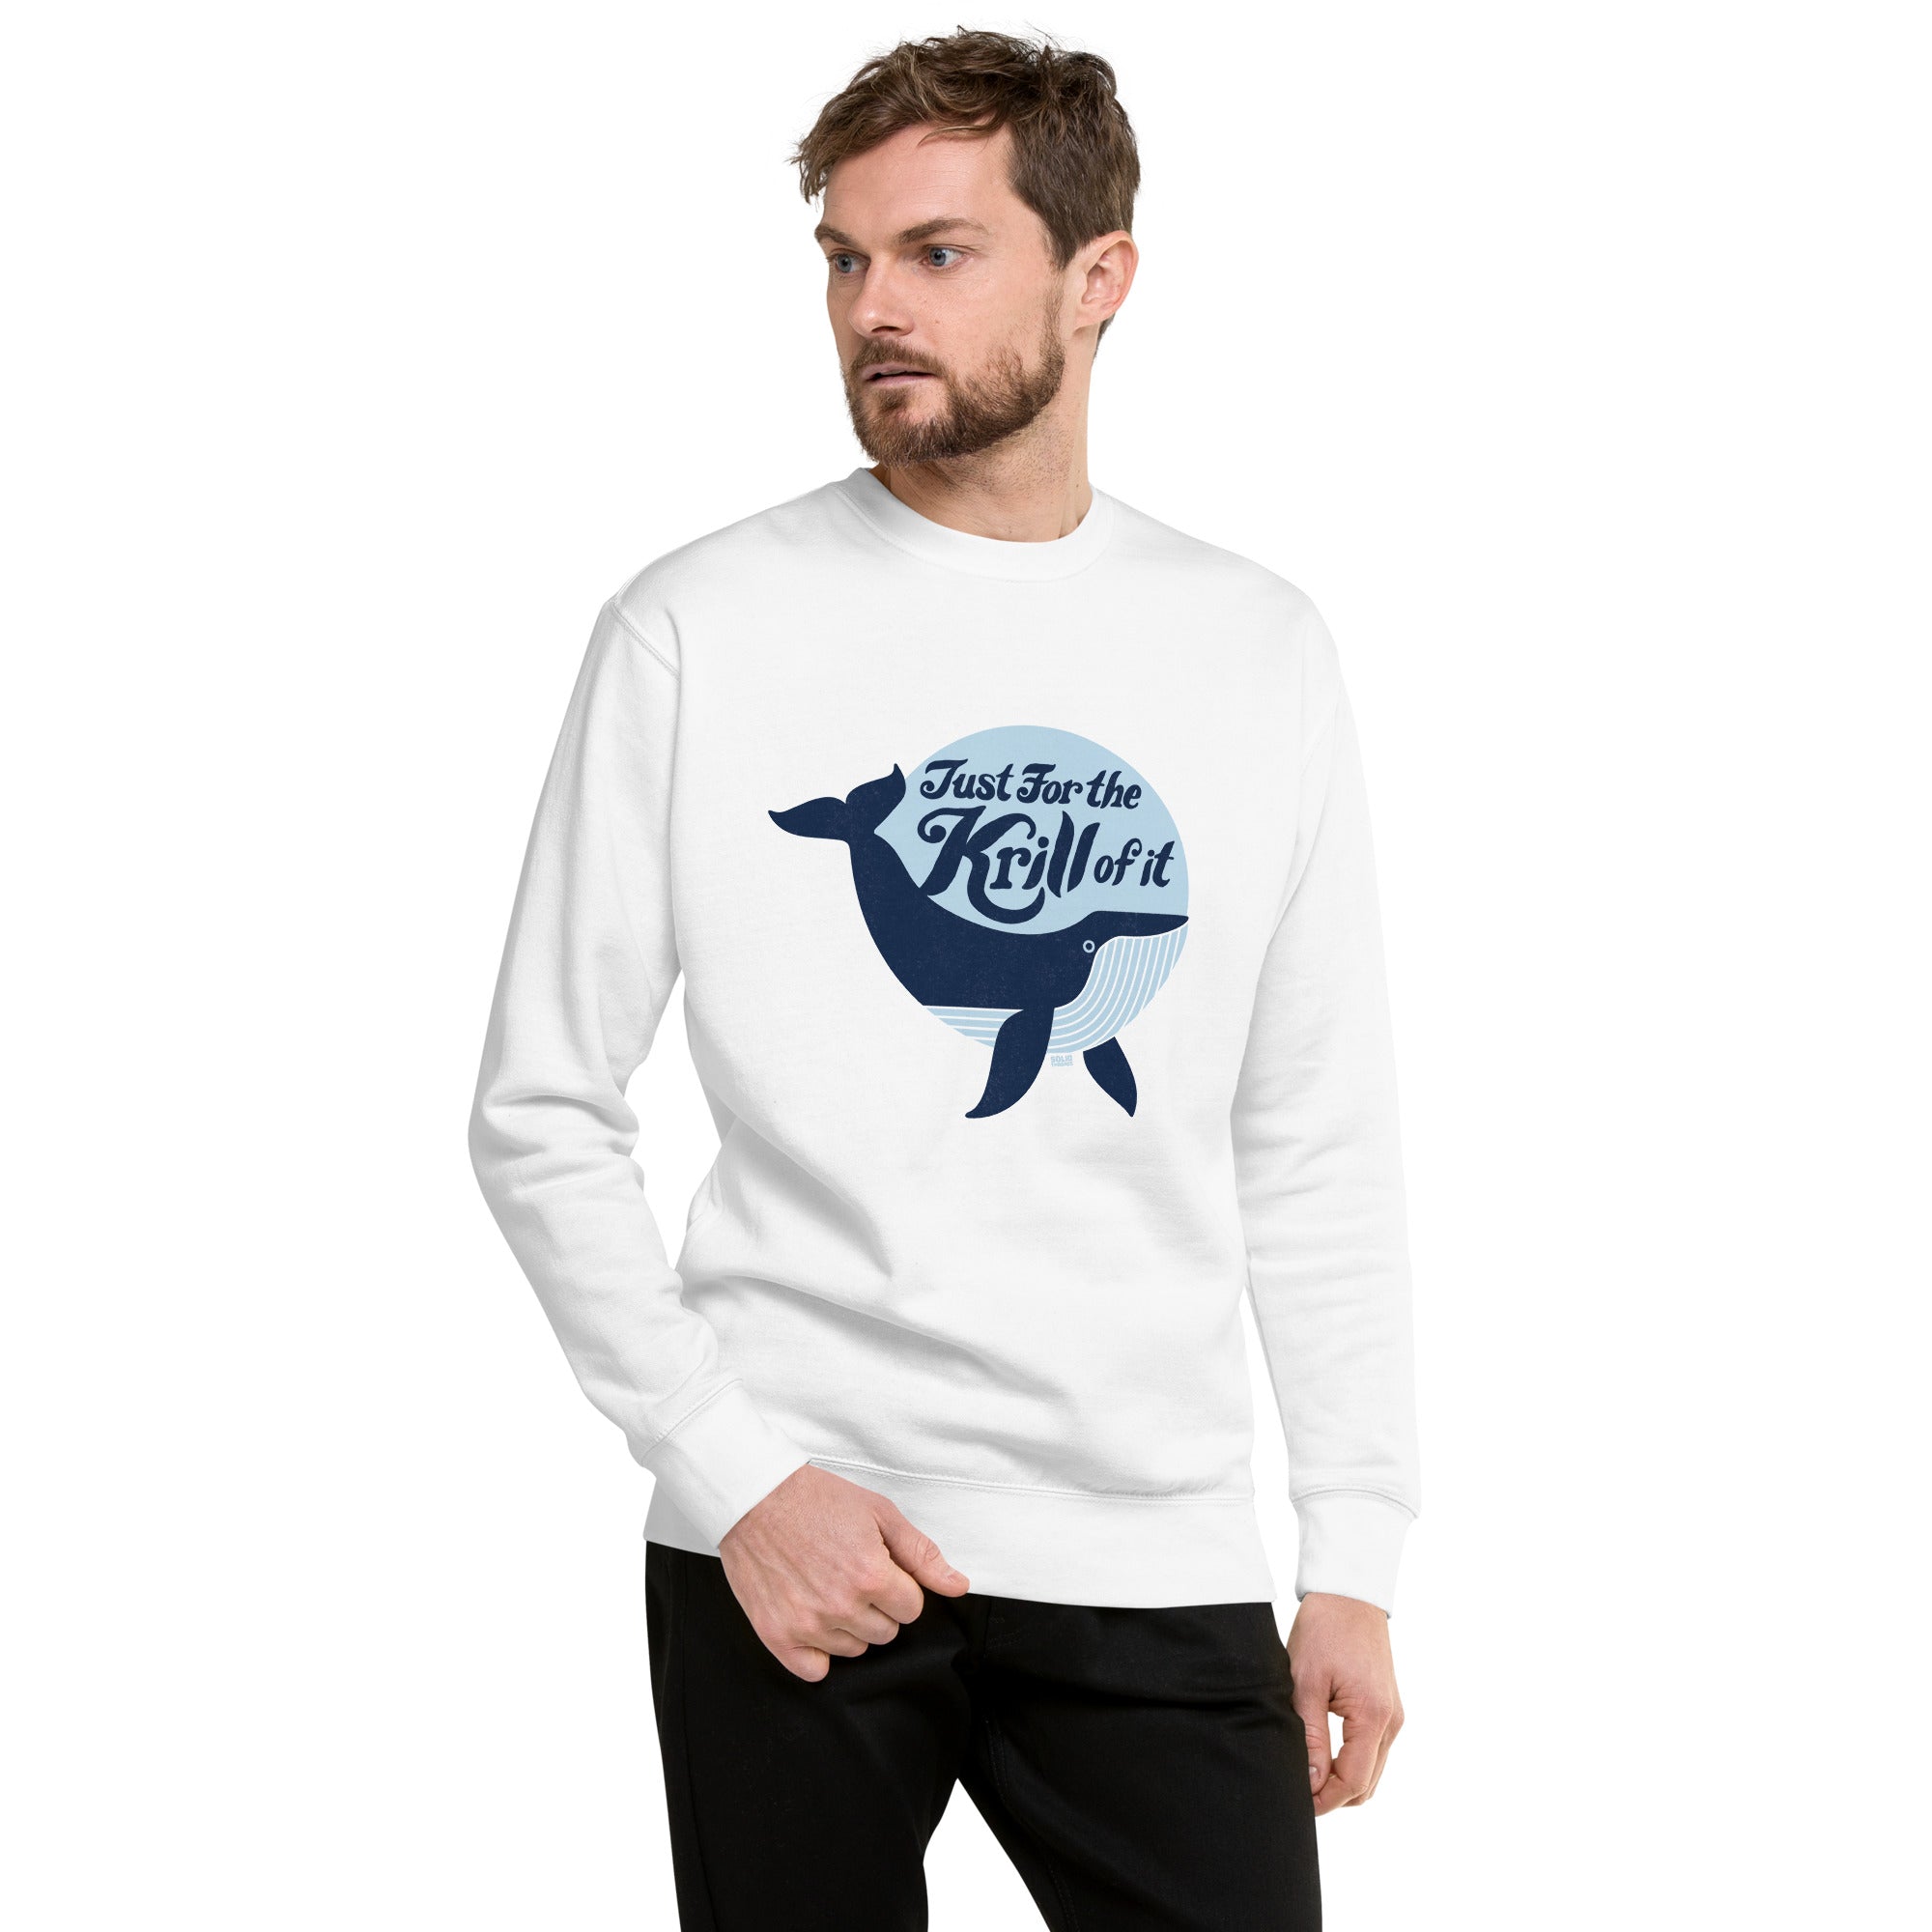 Just For The Krill Of It Retro Classic Sweatshirt | Funny Whale Fleece | Solid Threads